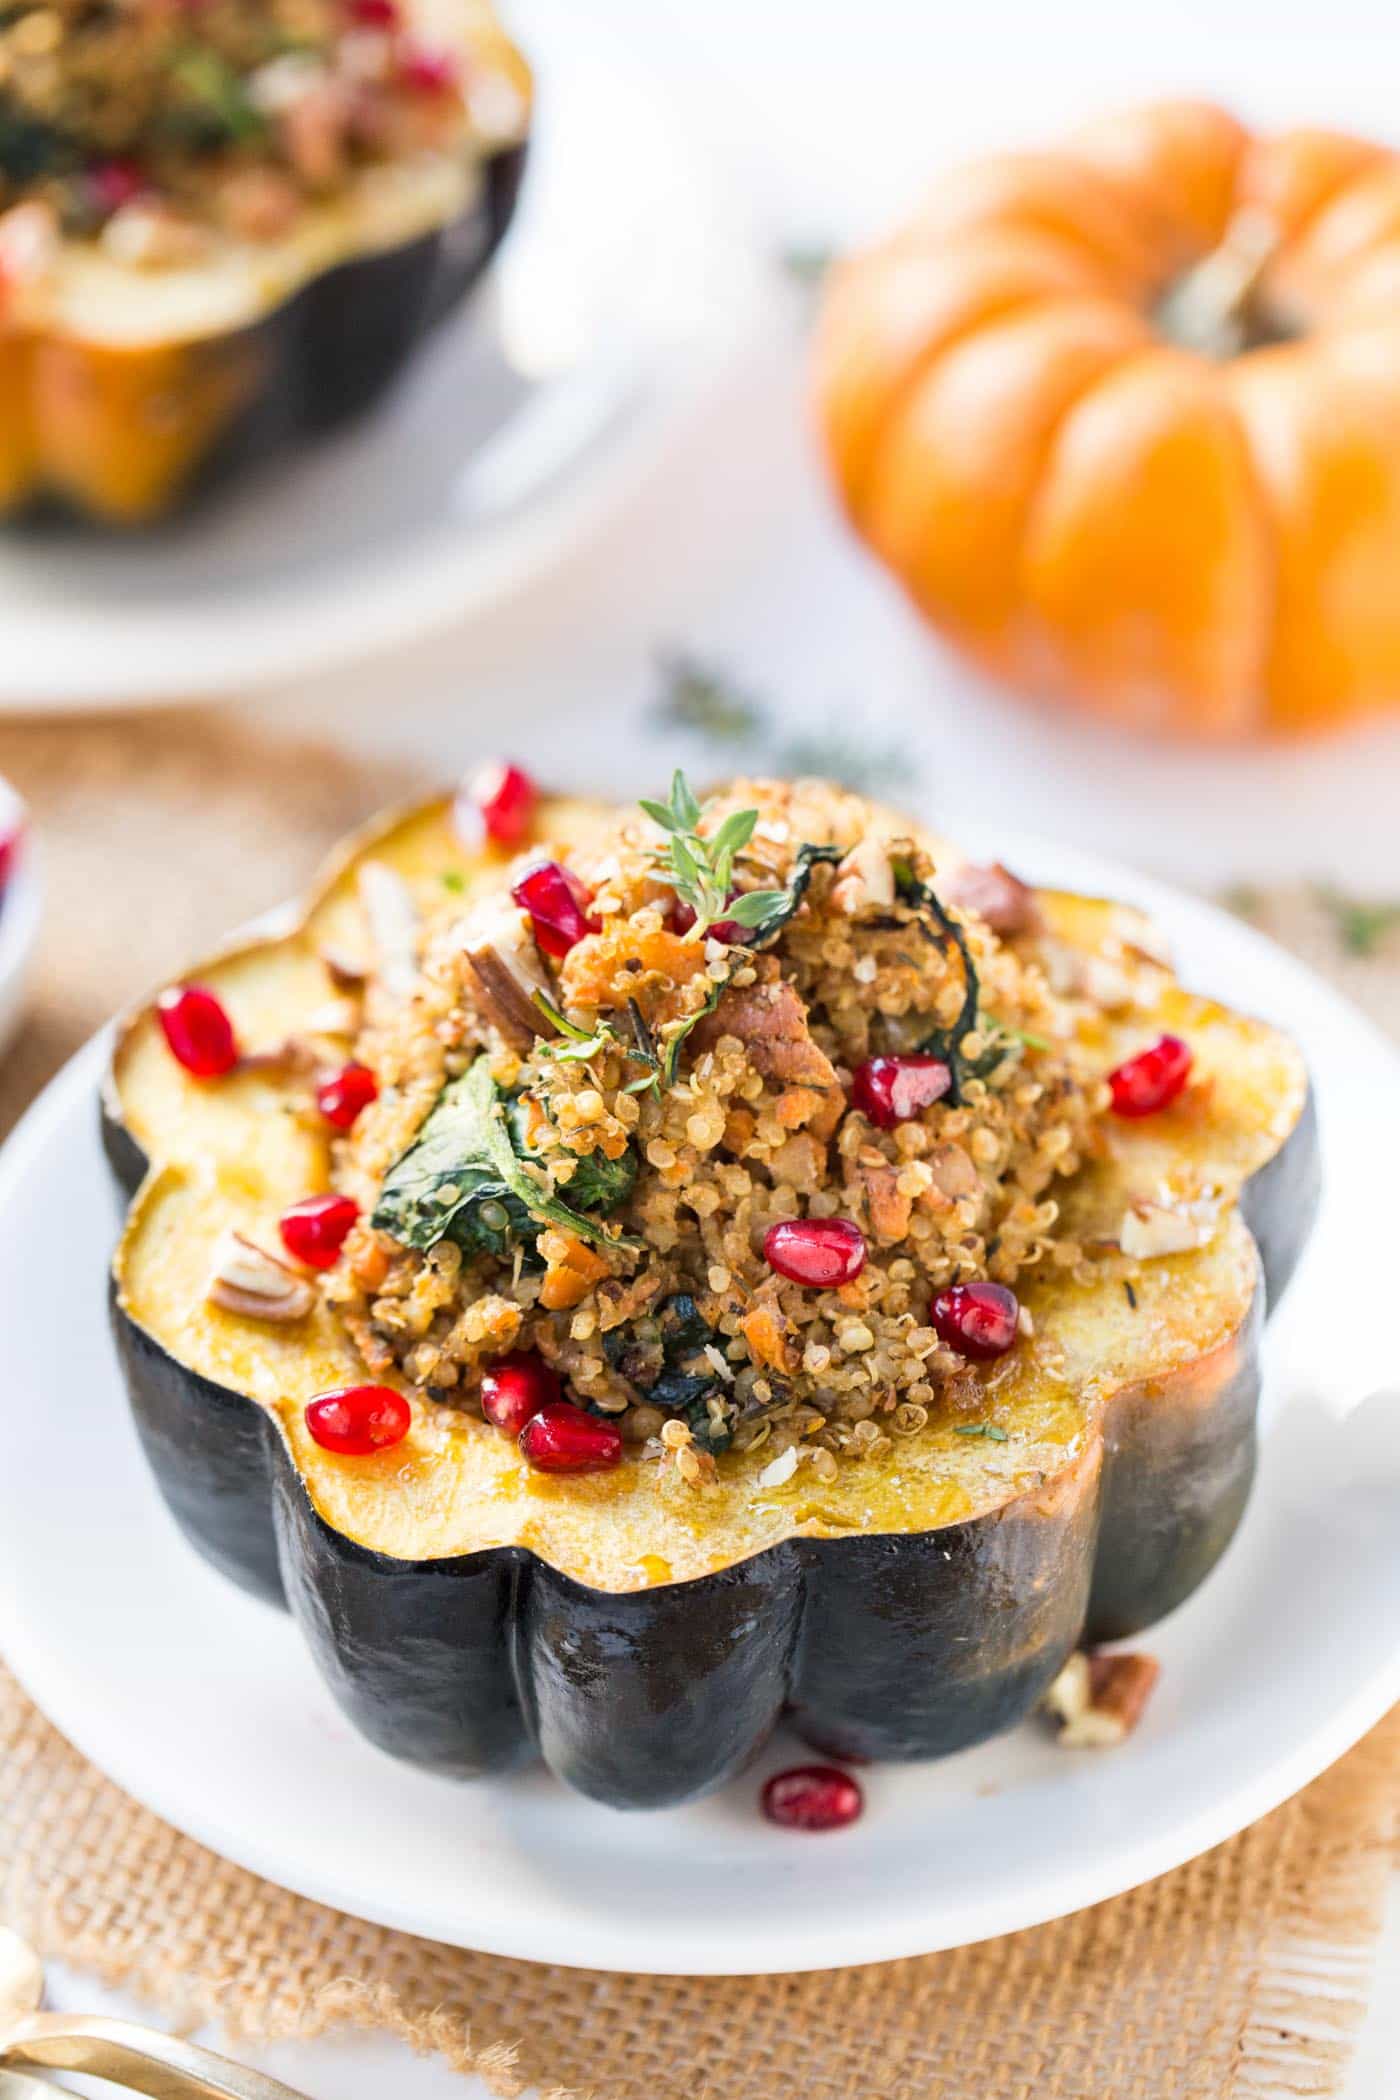 A mushroom stuffed acorn squash on a plate, topped with pomegranate seeds, with an uncooked acorn squash in the background